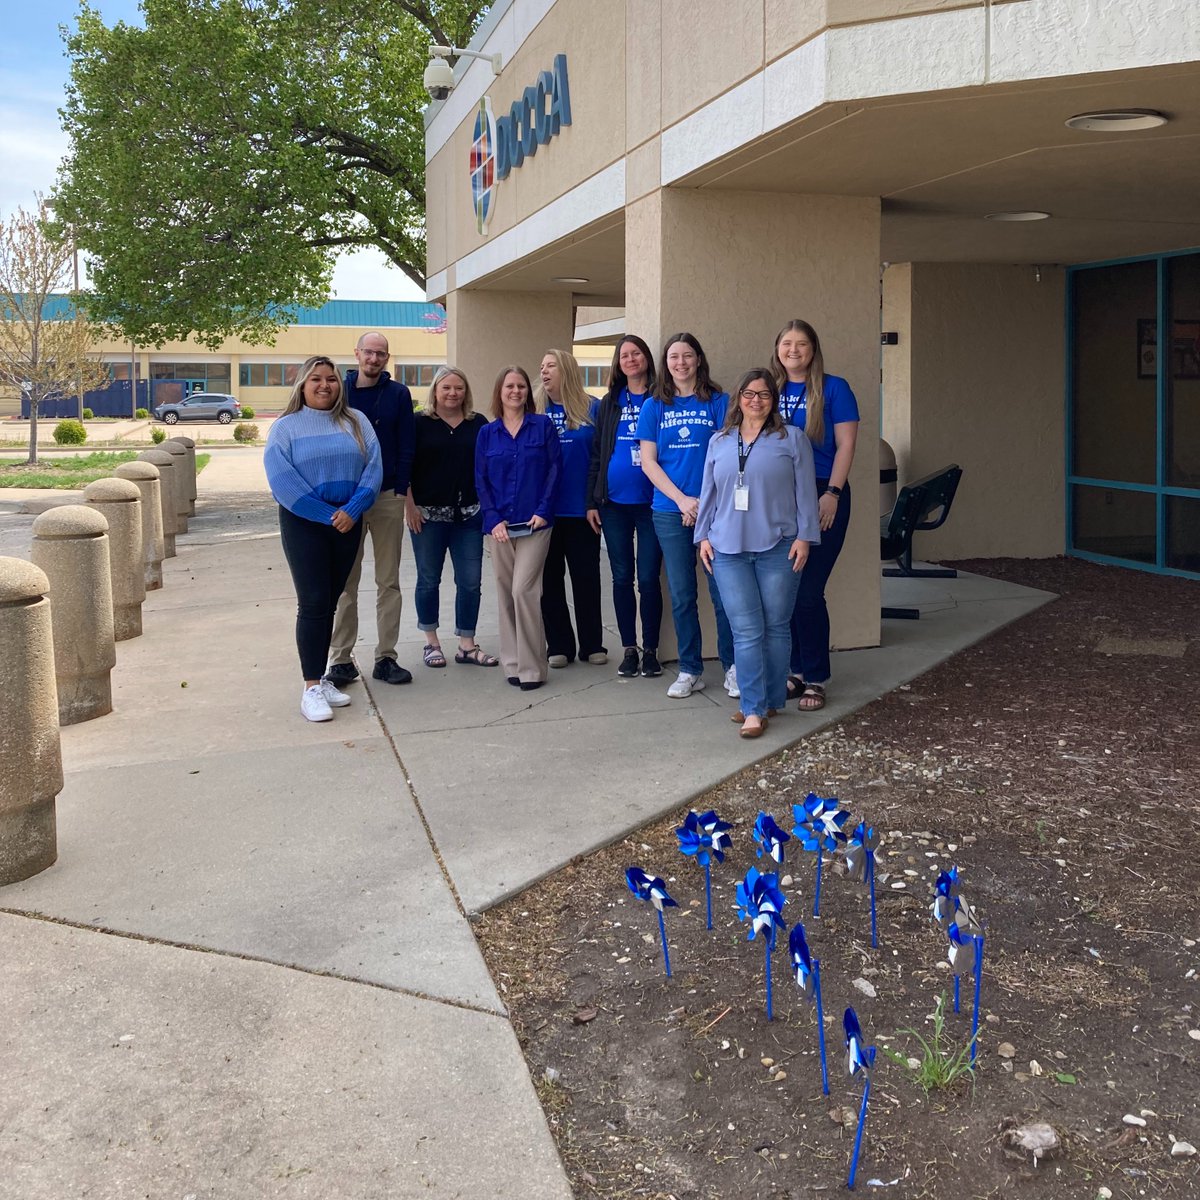 Wear Blue Day in full effect with our Wichita staff as well. Thank you for supporting Child Abuse Prevention Month!

#CAPMonthKS #WearBlueDay #BuildingHopefulFutures #DCCCA